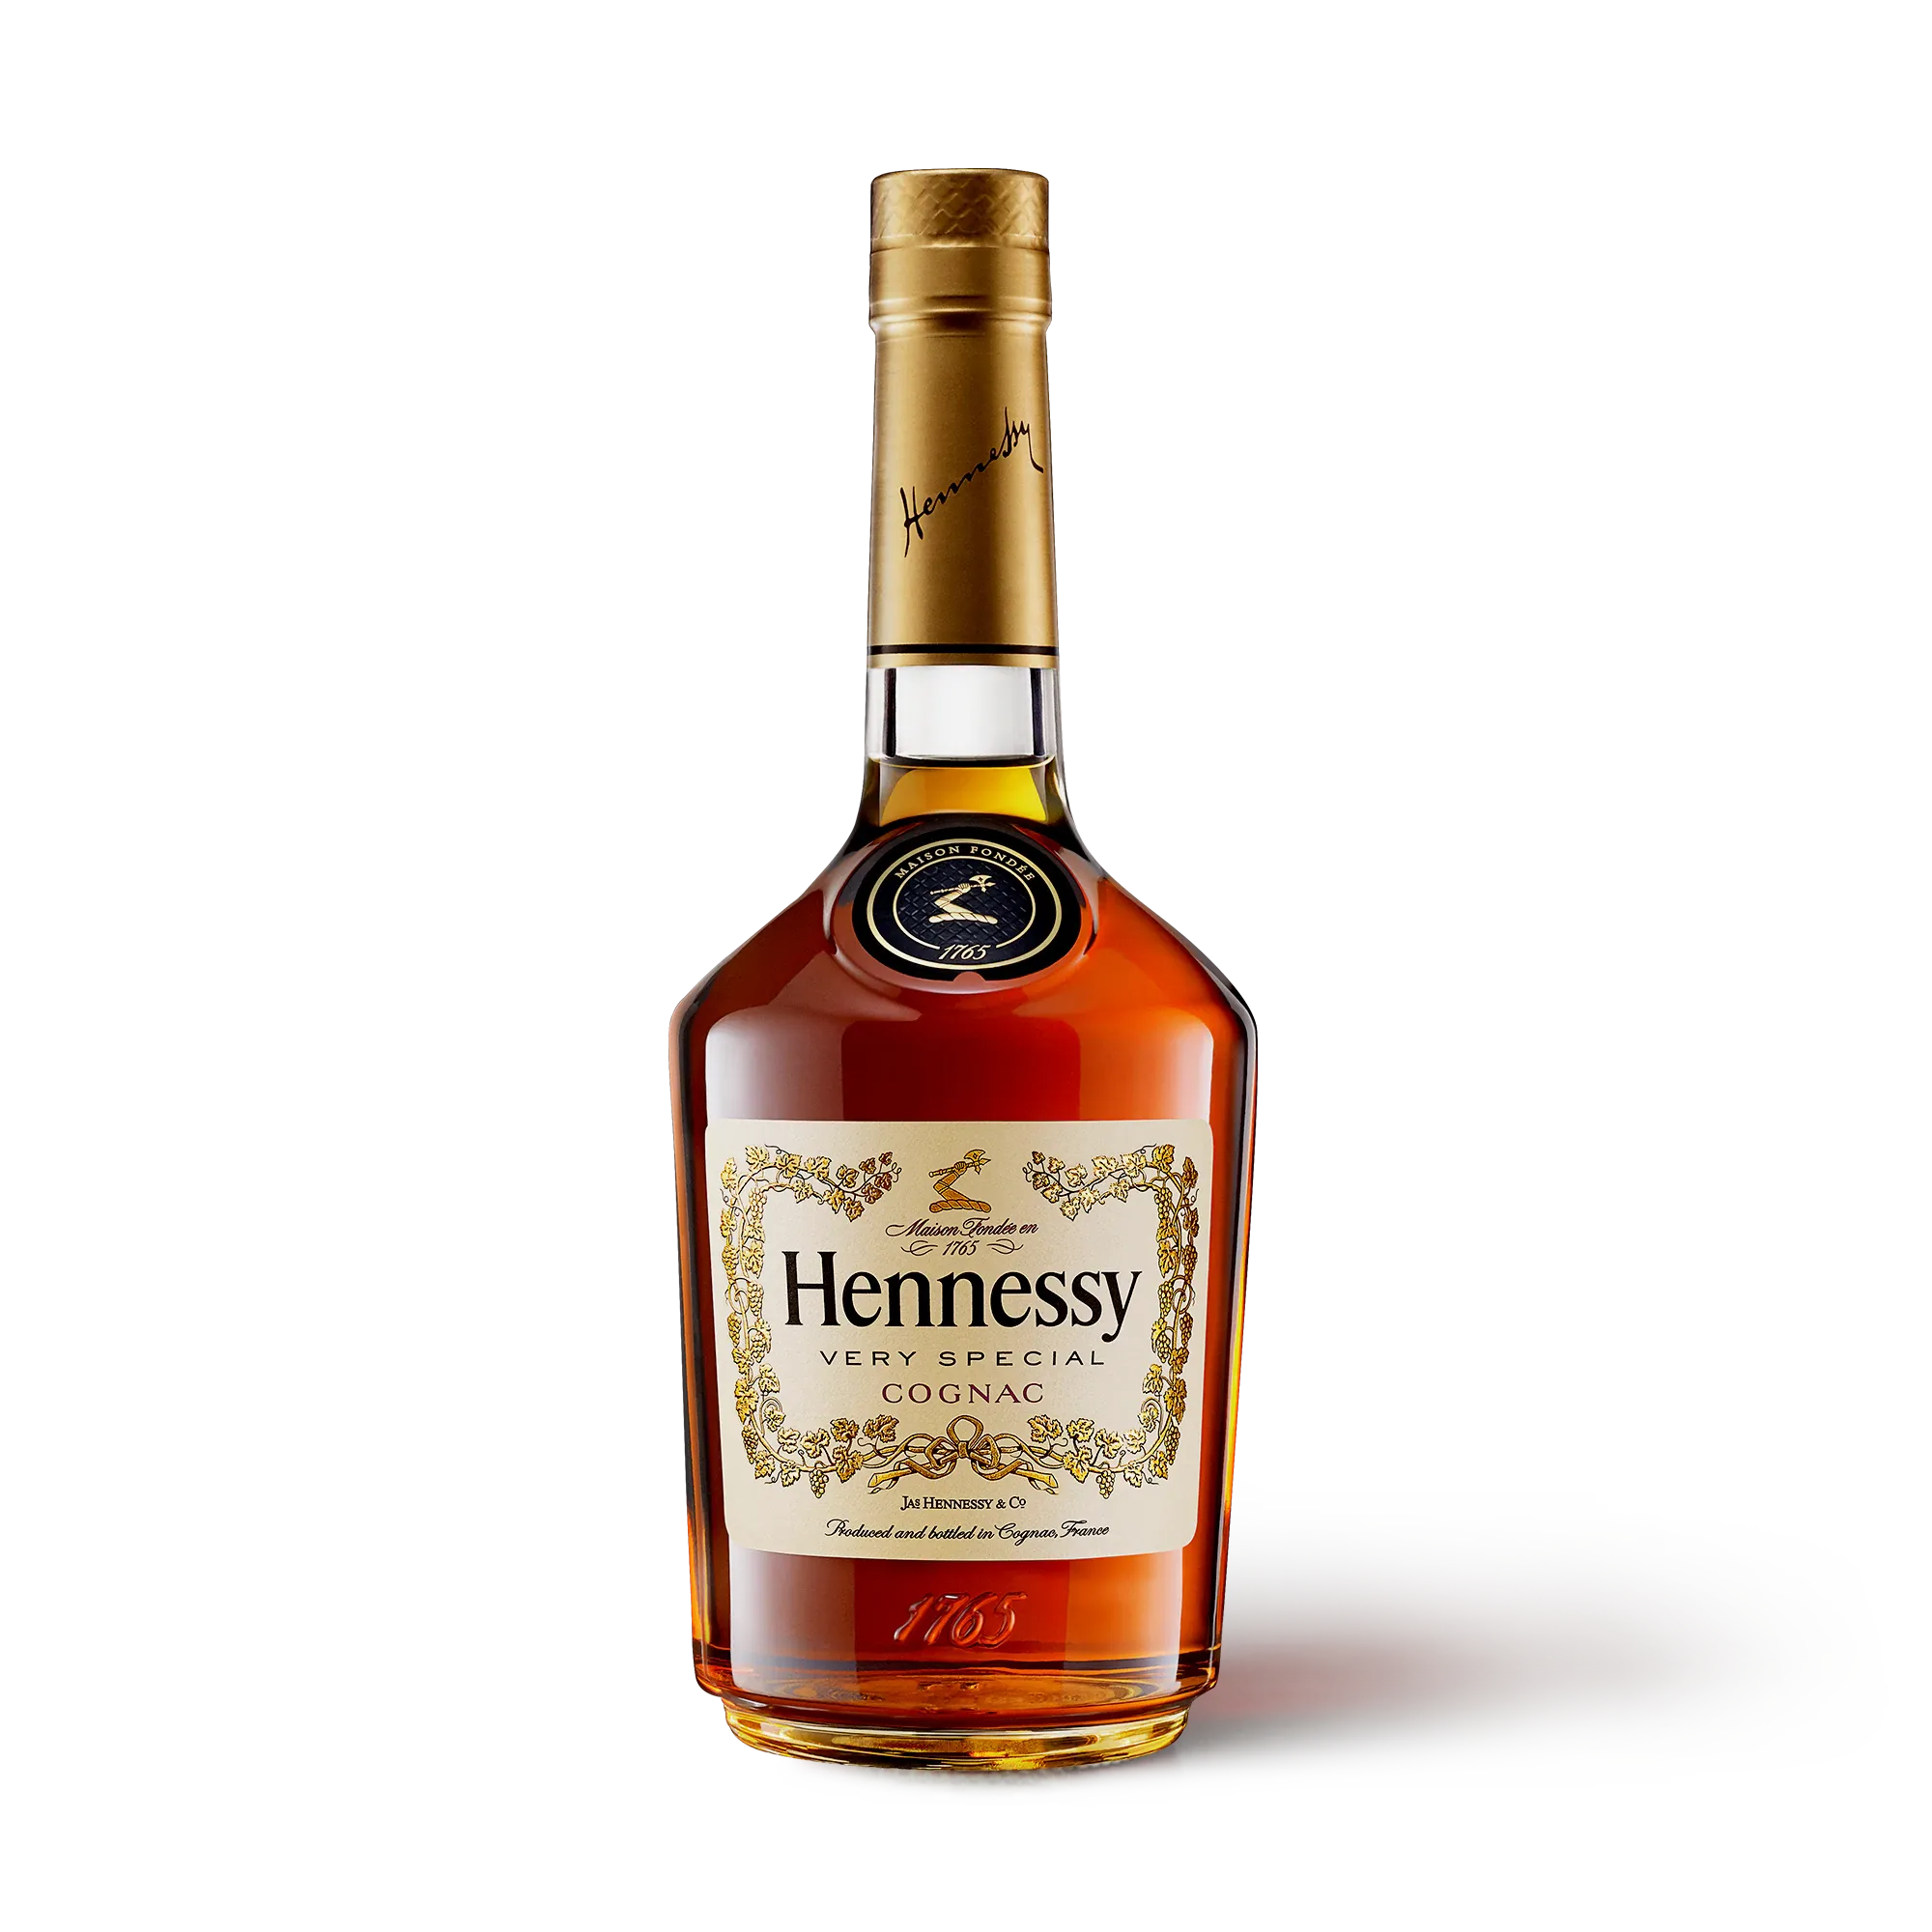 How to Spot a Fake Bottle of Hennessy